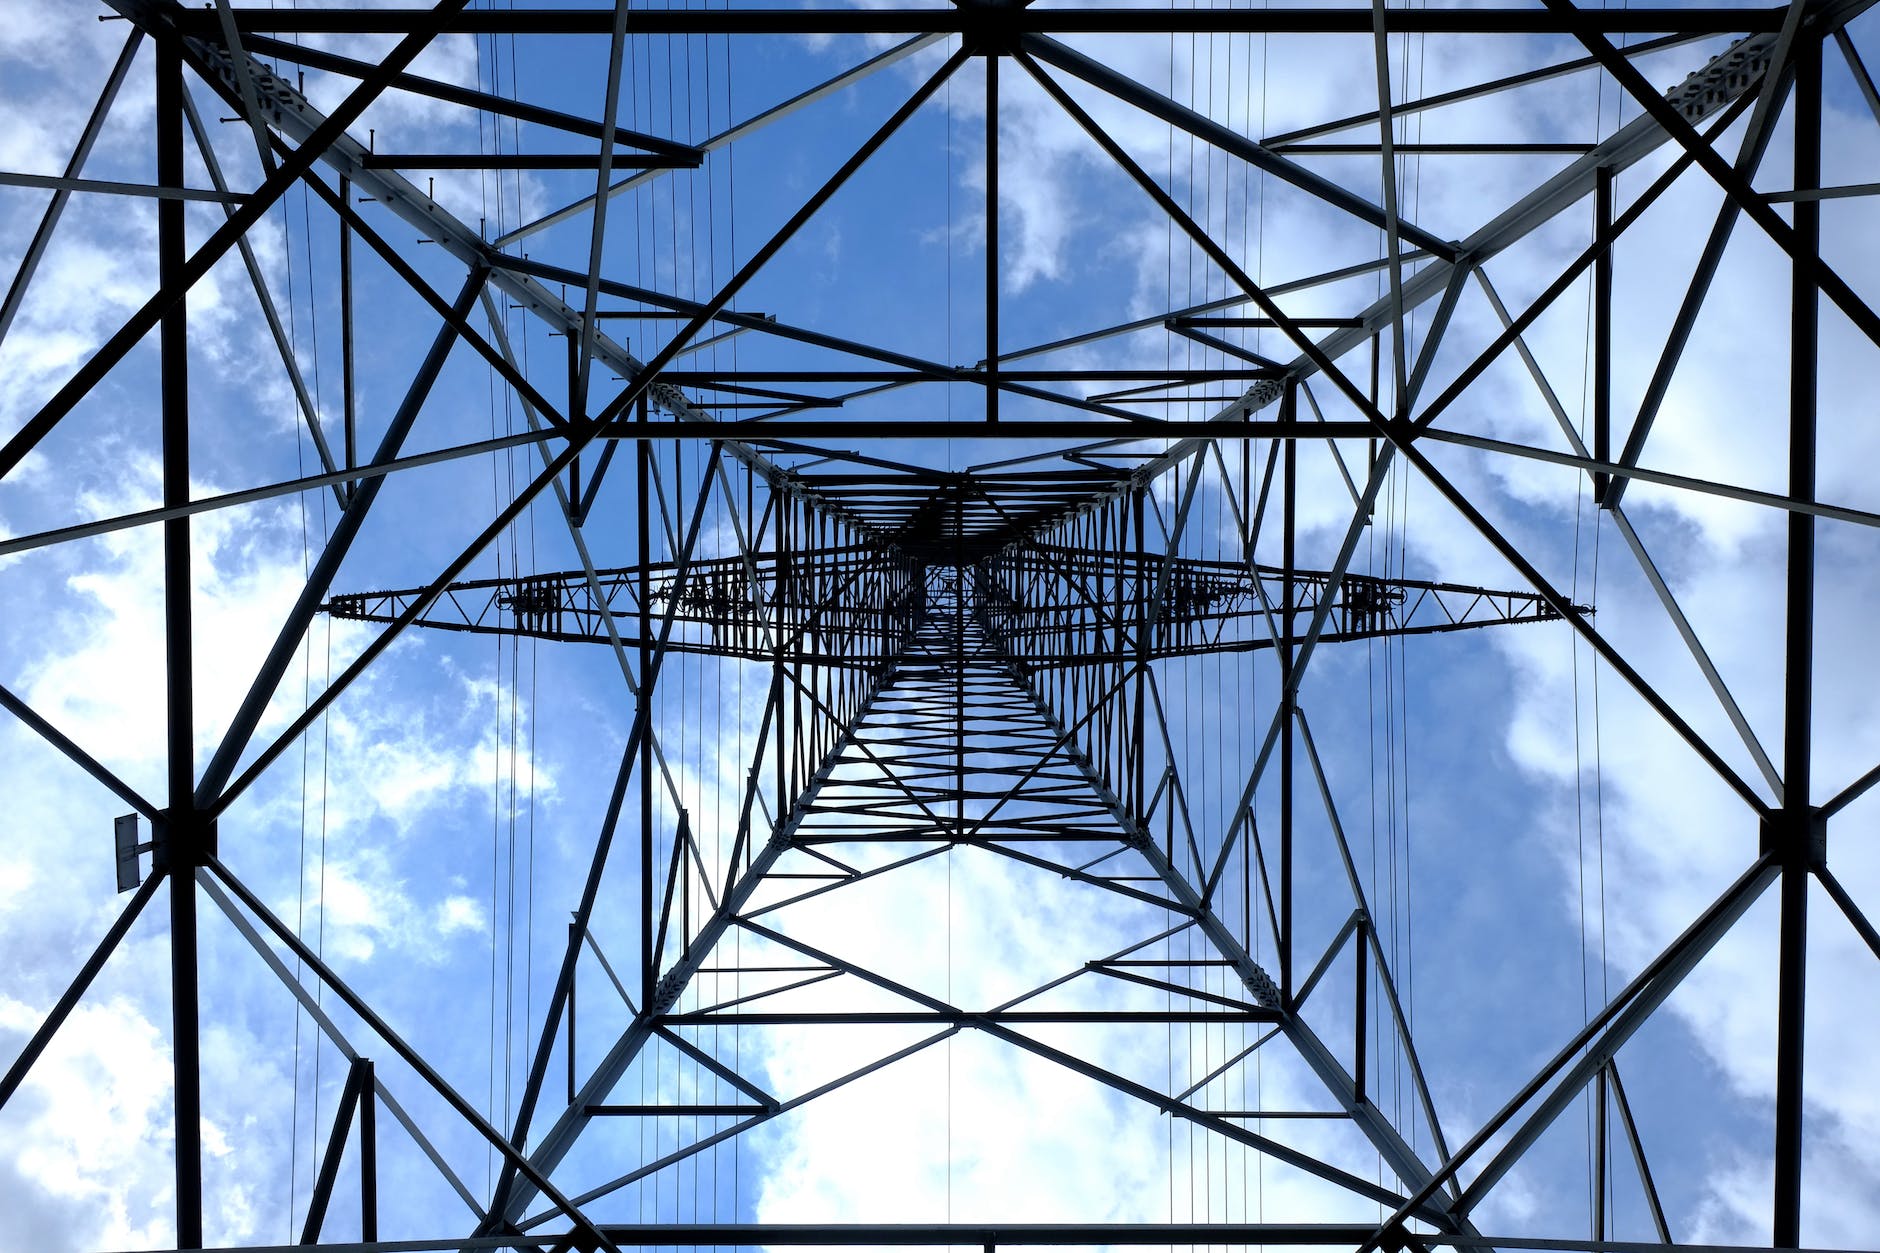 An electricity pylon viewed from below.